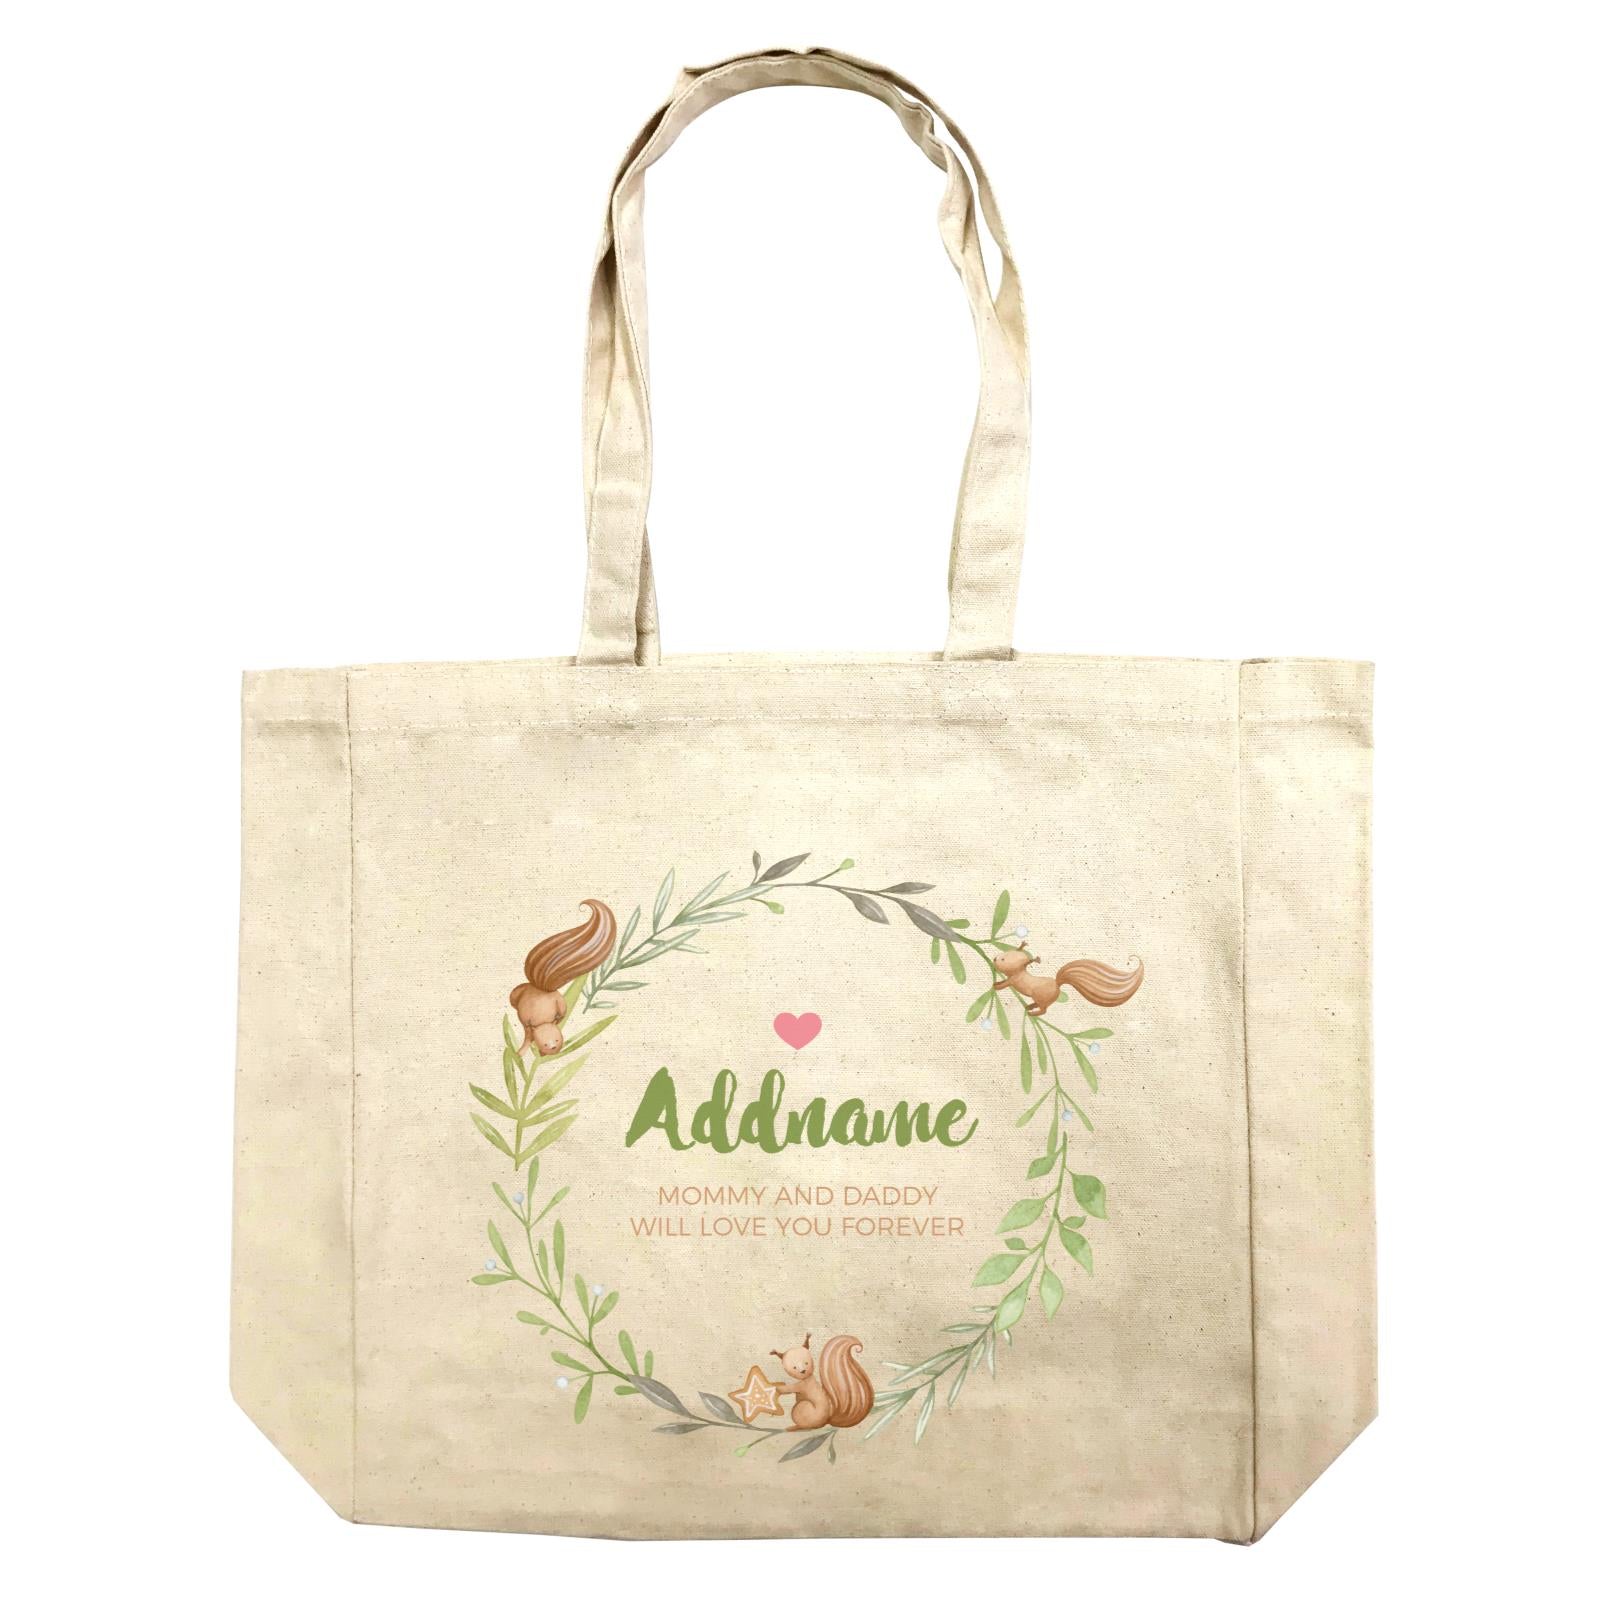 Watercolour Squirrels Green Wreath Personalizable with Name and Text Shopping Bag